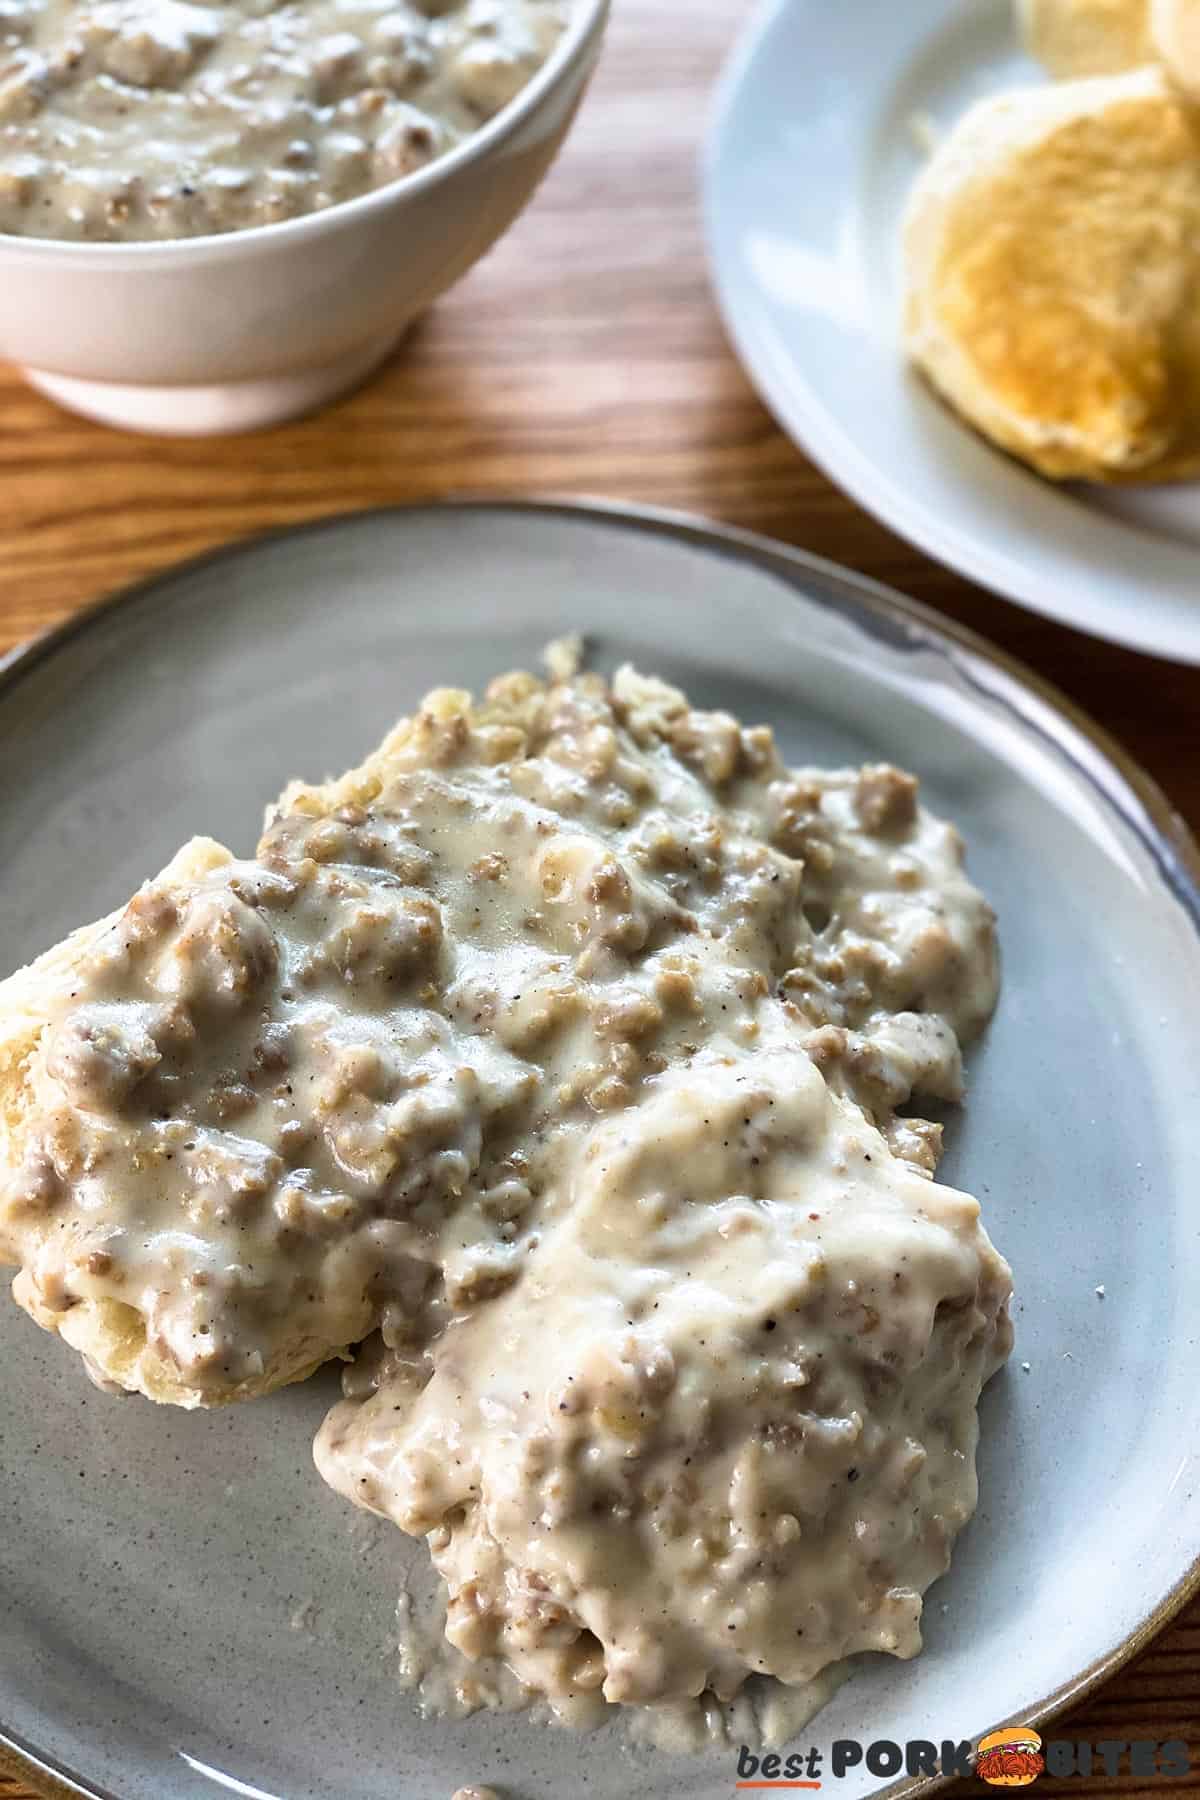 a plate of gravy biscuits with more gravy and biscuits in the background